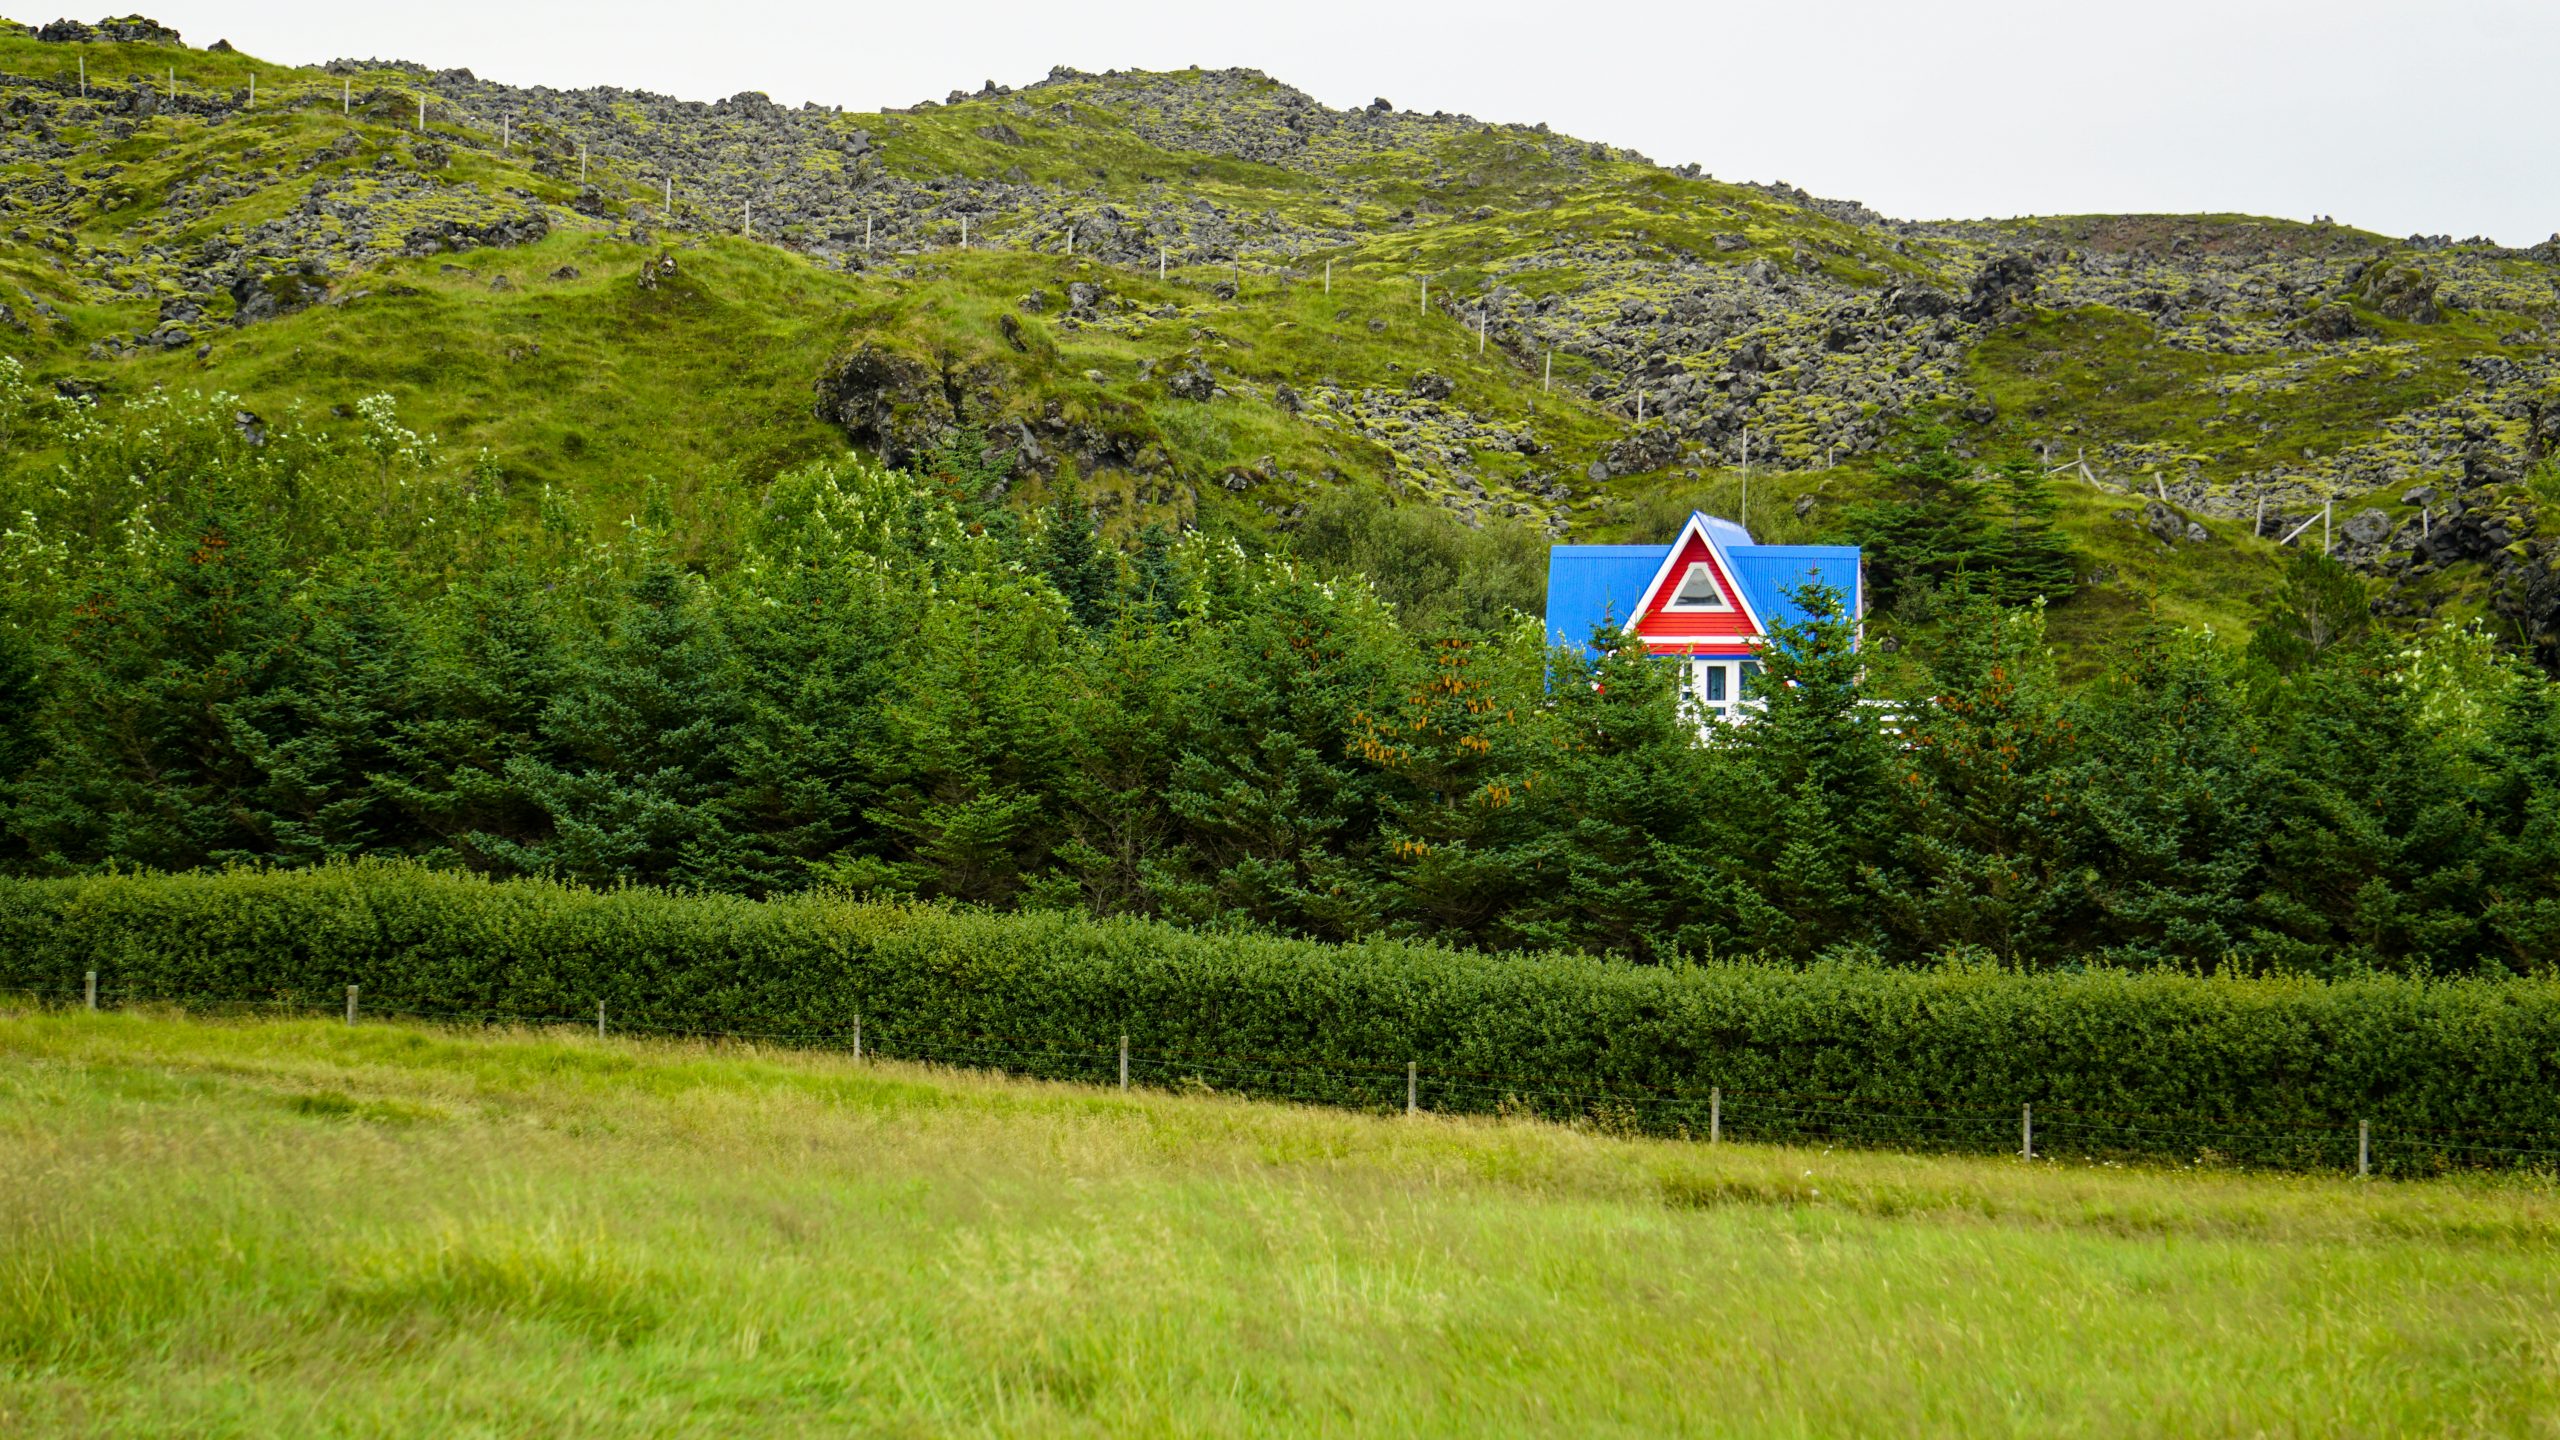 A house with a blue roof and a red wall in between trees in Iceland